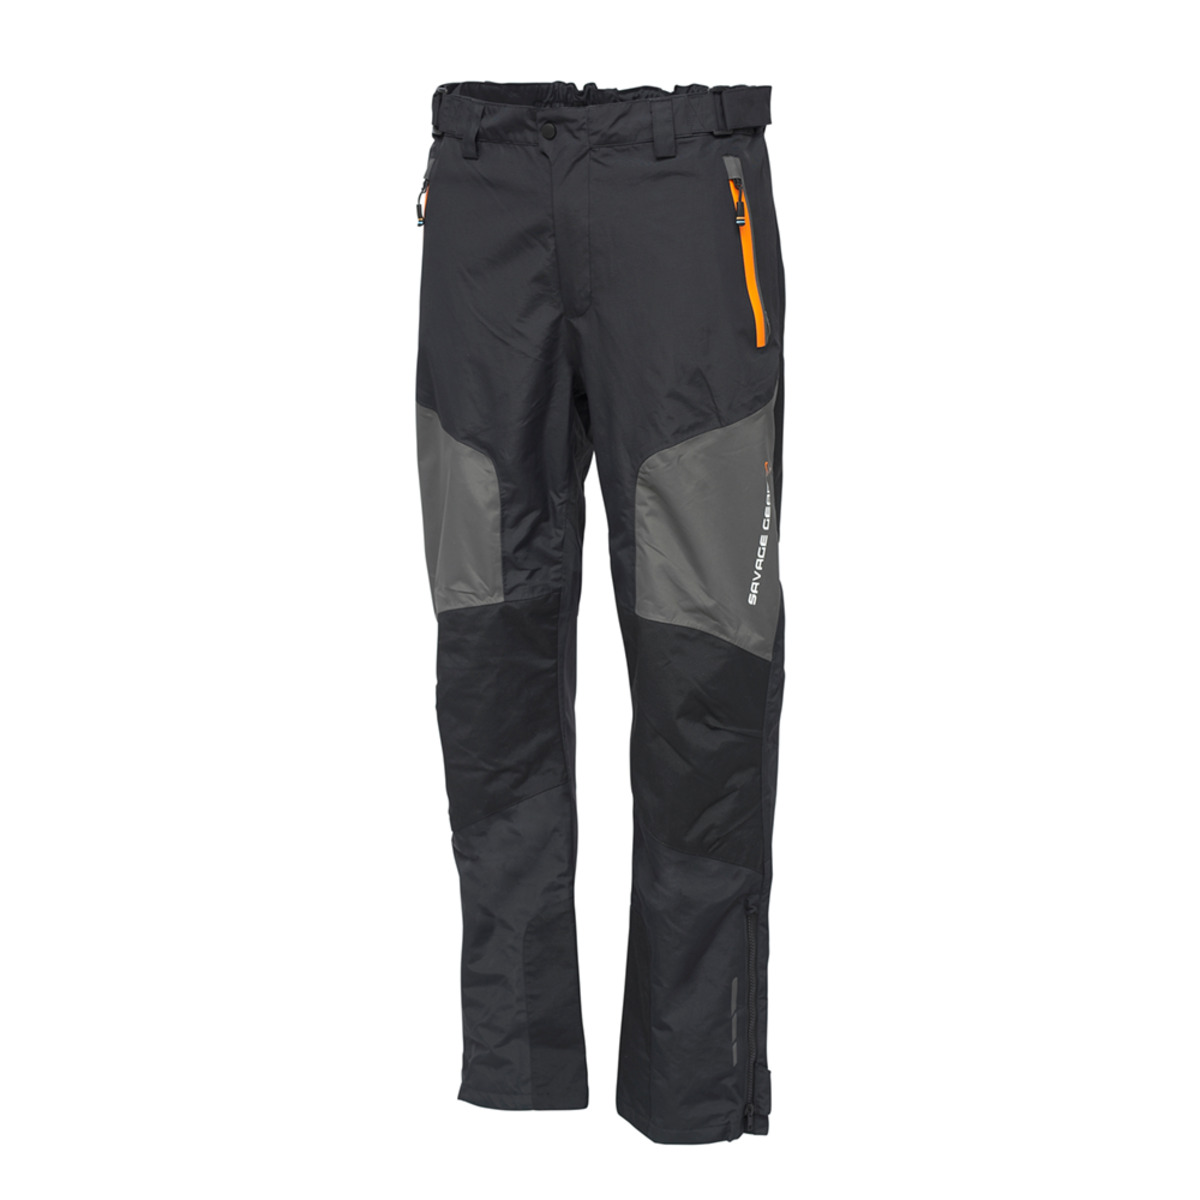 Savage Gear Wp Performance Trousers - S BLACK INK/GREY